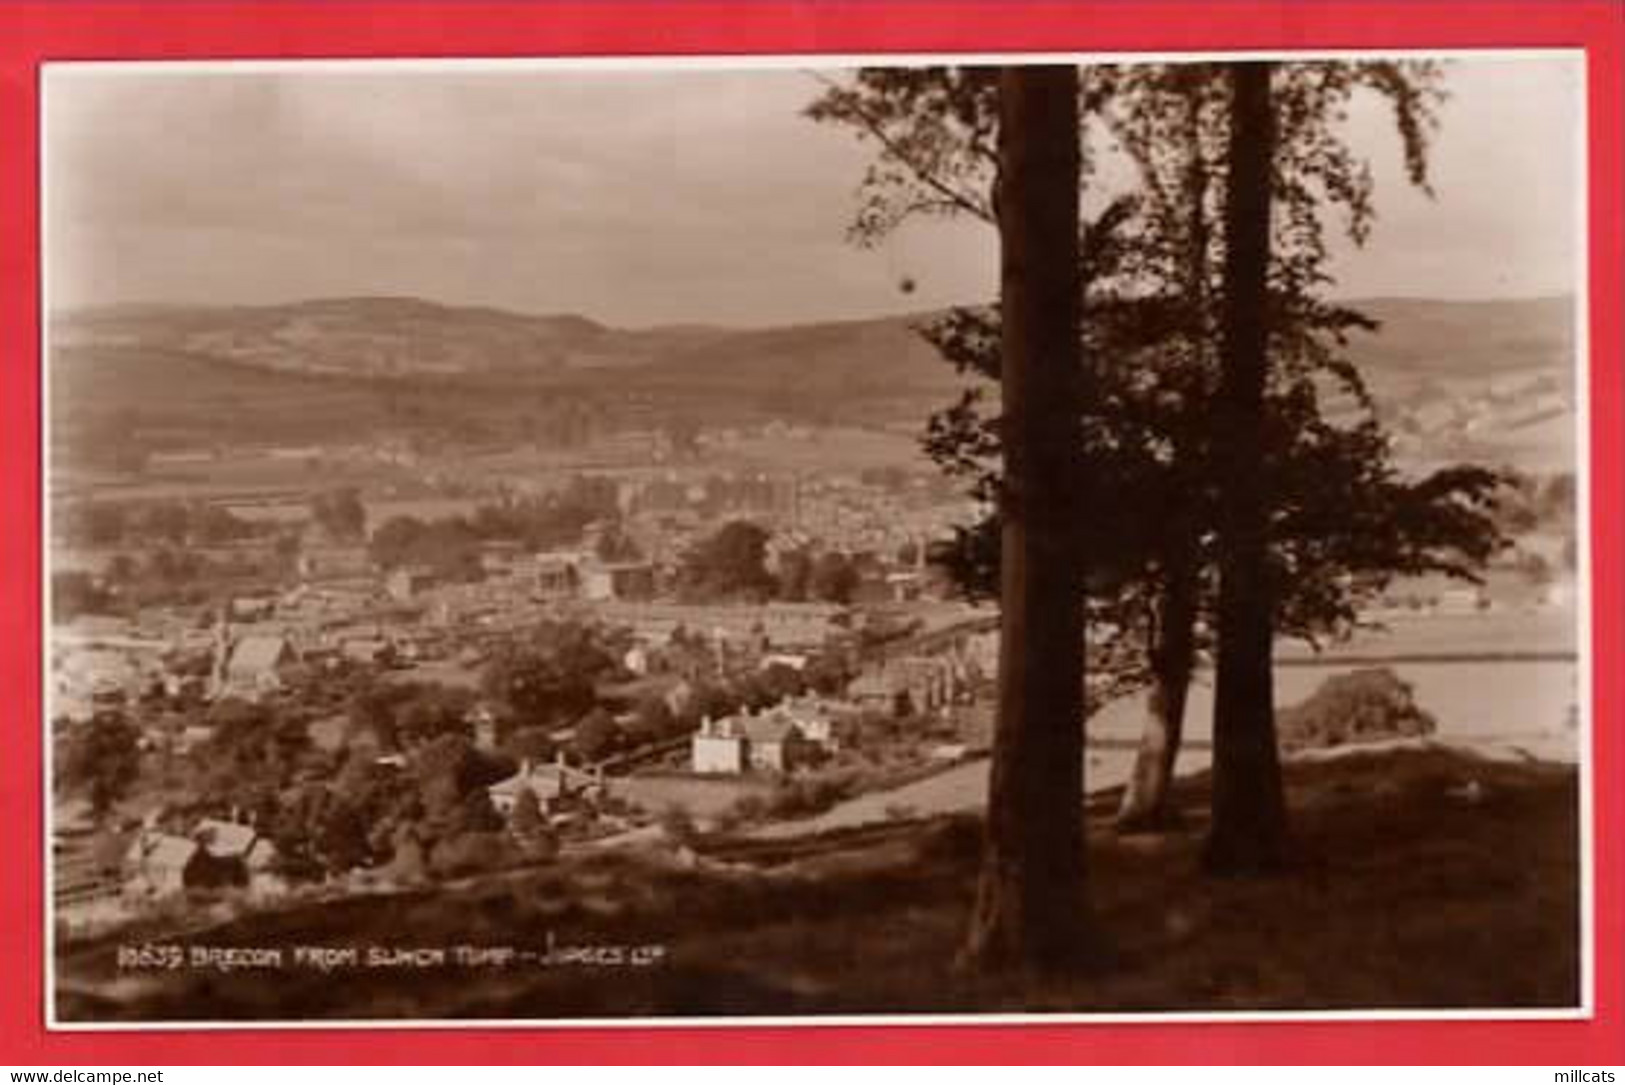 UK WALES BRECONSHIRE    BRECON FROM SLWCH TUMP  VIEW 2     JUDGES RP - Breconshire